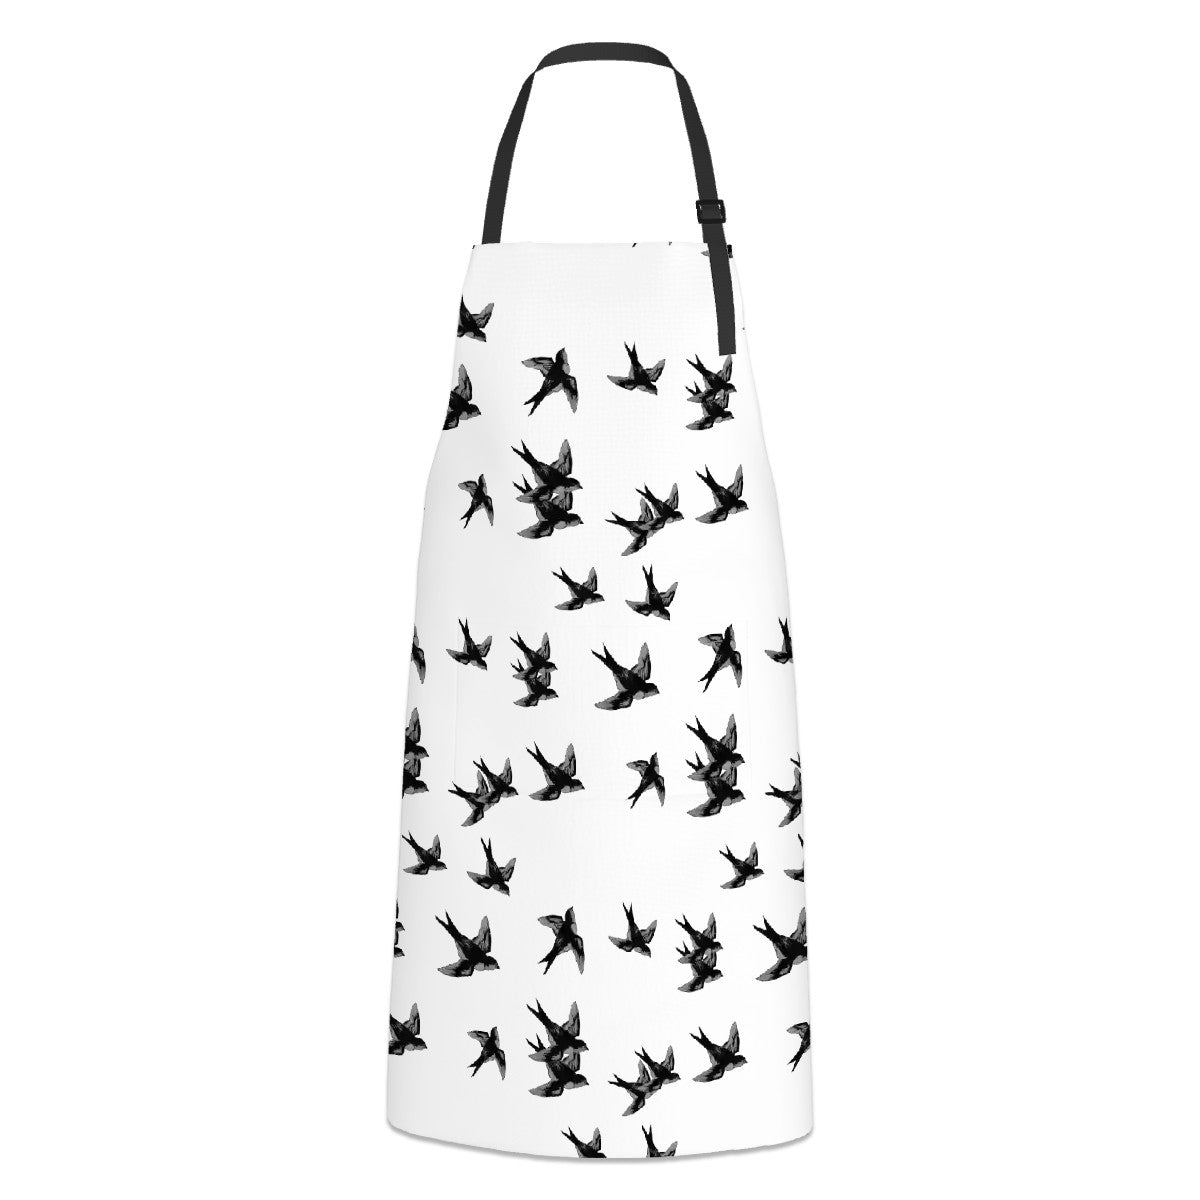 Apron with two pockets barn swallow pattern